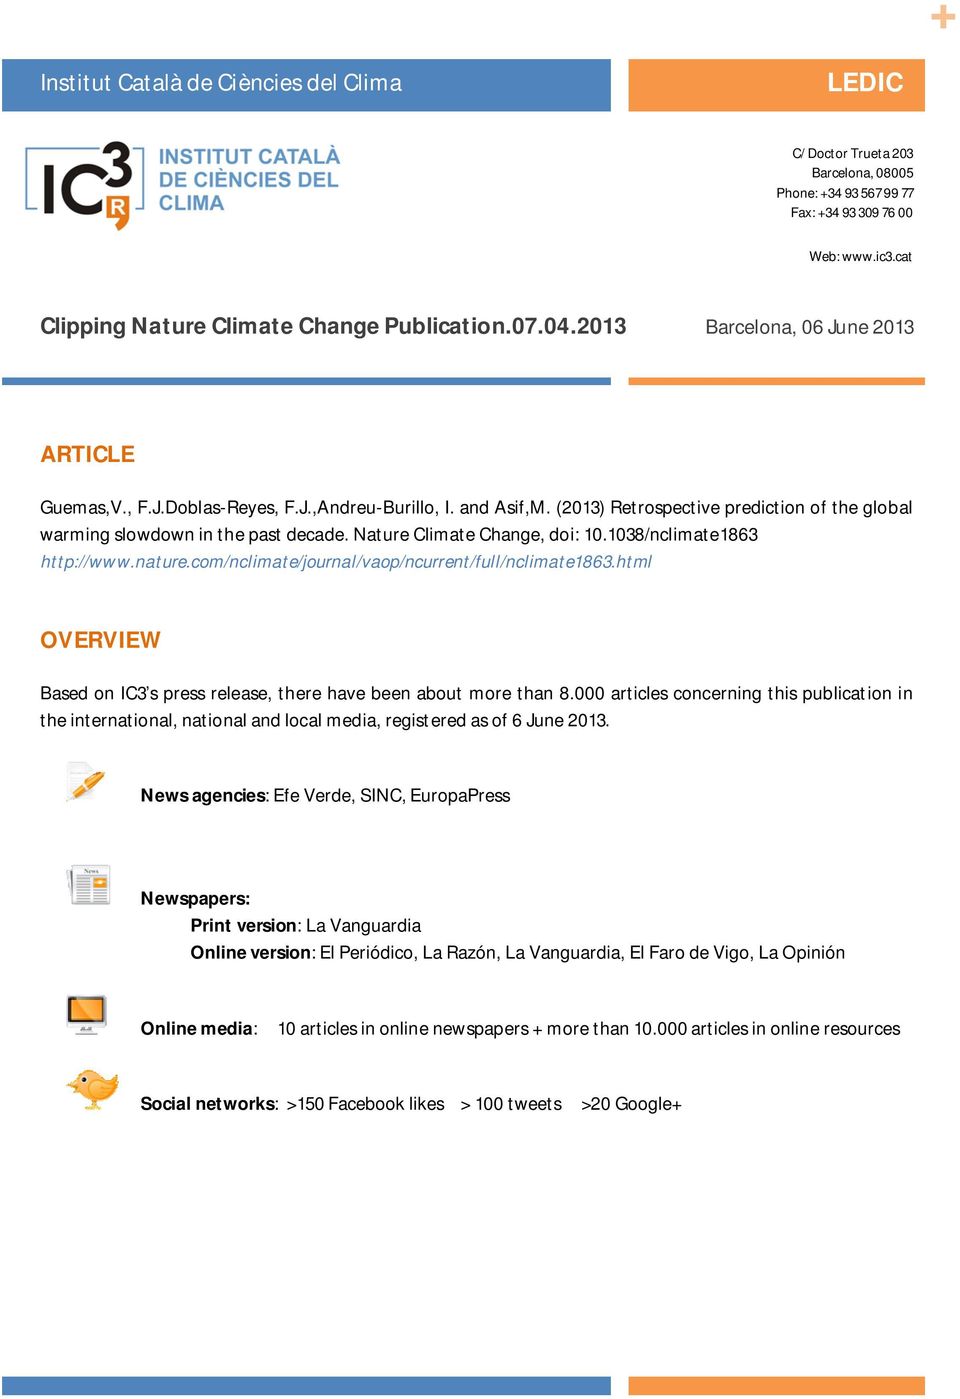 Nature Climate Change, doi: 10.1038/nclimate1863 http://www.nature.com/nclimate/journal/vaop/ncurrent/full/nclimate1863.html OVERVIEW Based on IC3 s press release, there have been about more than 8.